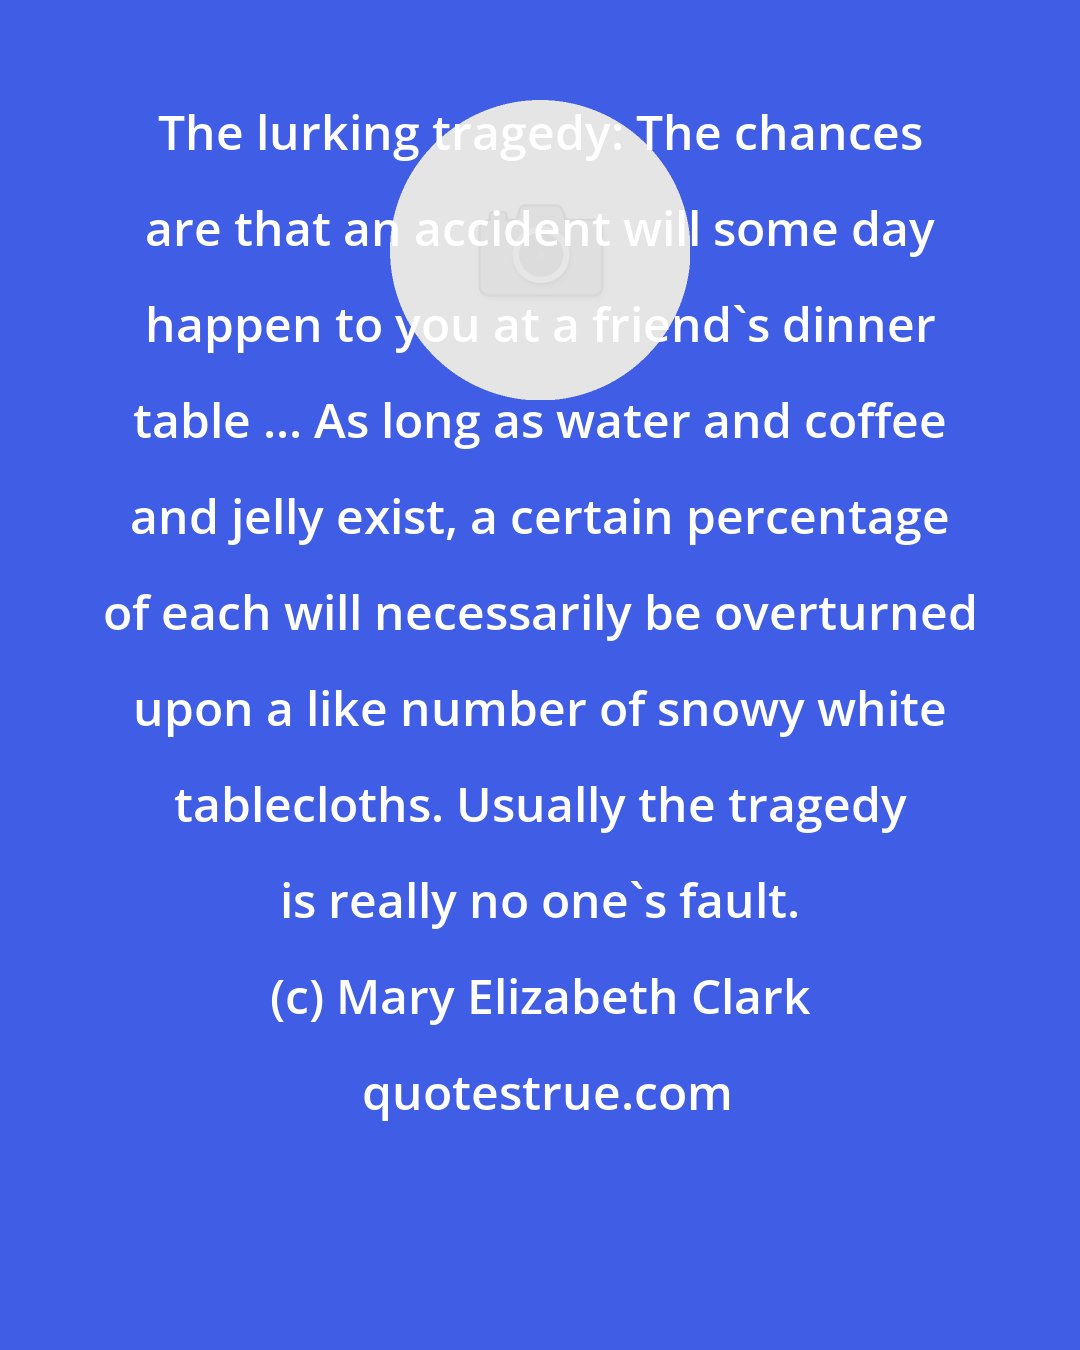 Mary Elizabeth Clark: The lurking tragedy: The chances are that an accident will some day happen to you at a friend's dinner table ... As long as water and coffee and jelly exist, a certain percentage of each will necessarily be overturned upon a like number of snowy white tablecloths. Usually the tragedy is really no one's fault.